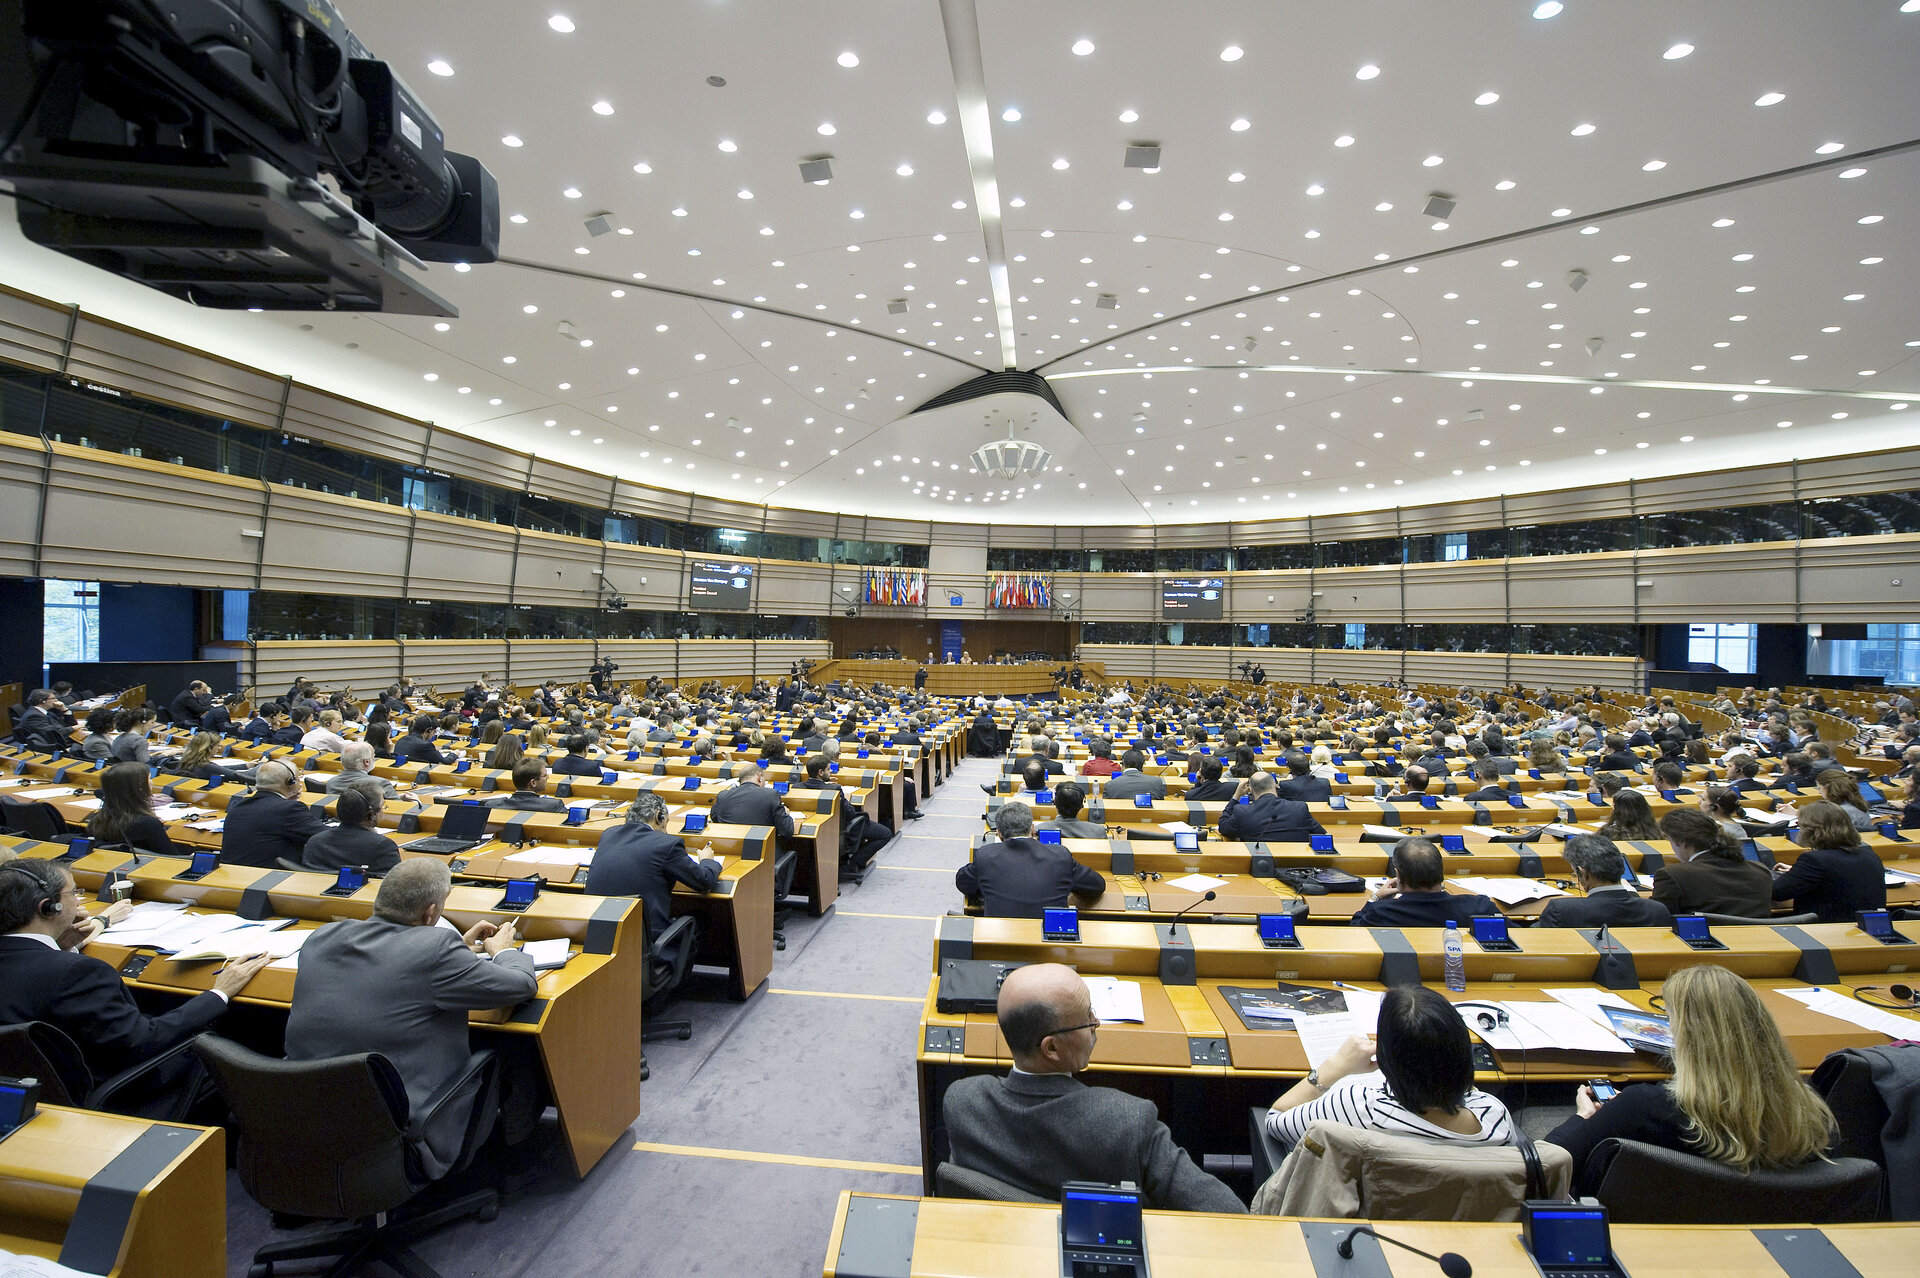 Hemicycle of the European parliament during the Conference on Space Policy for society and citizens